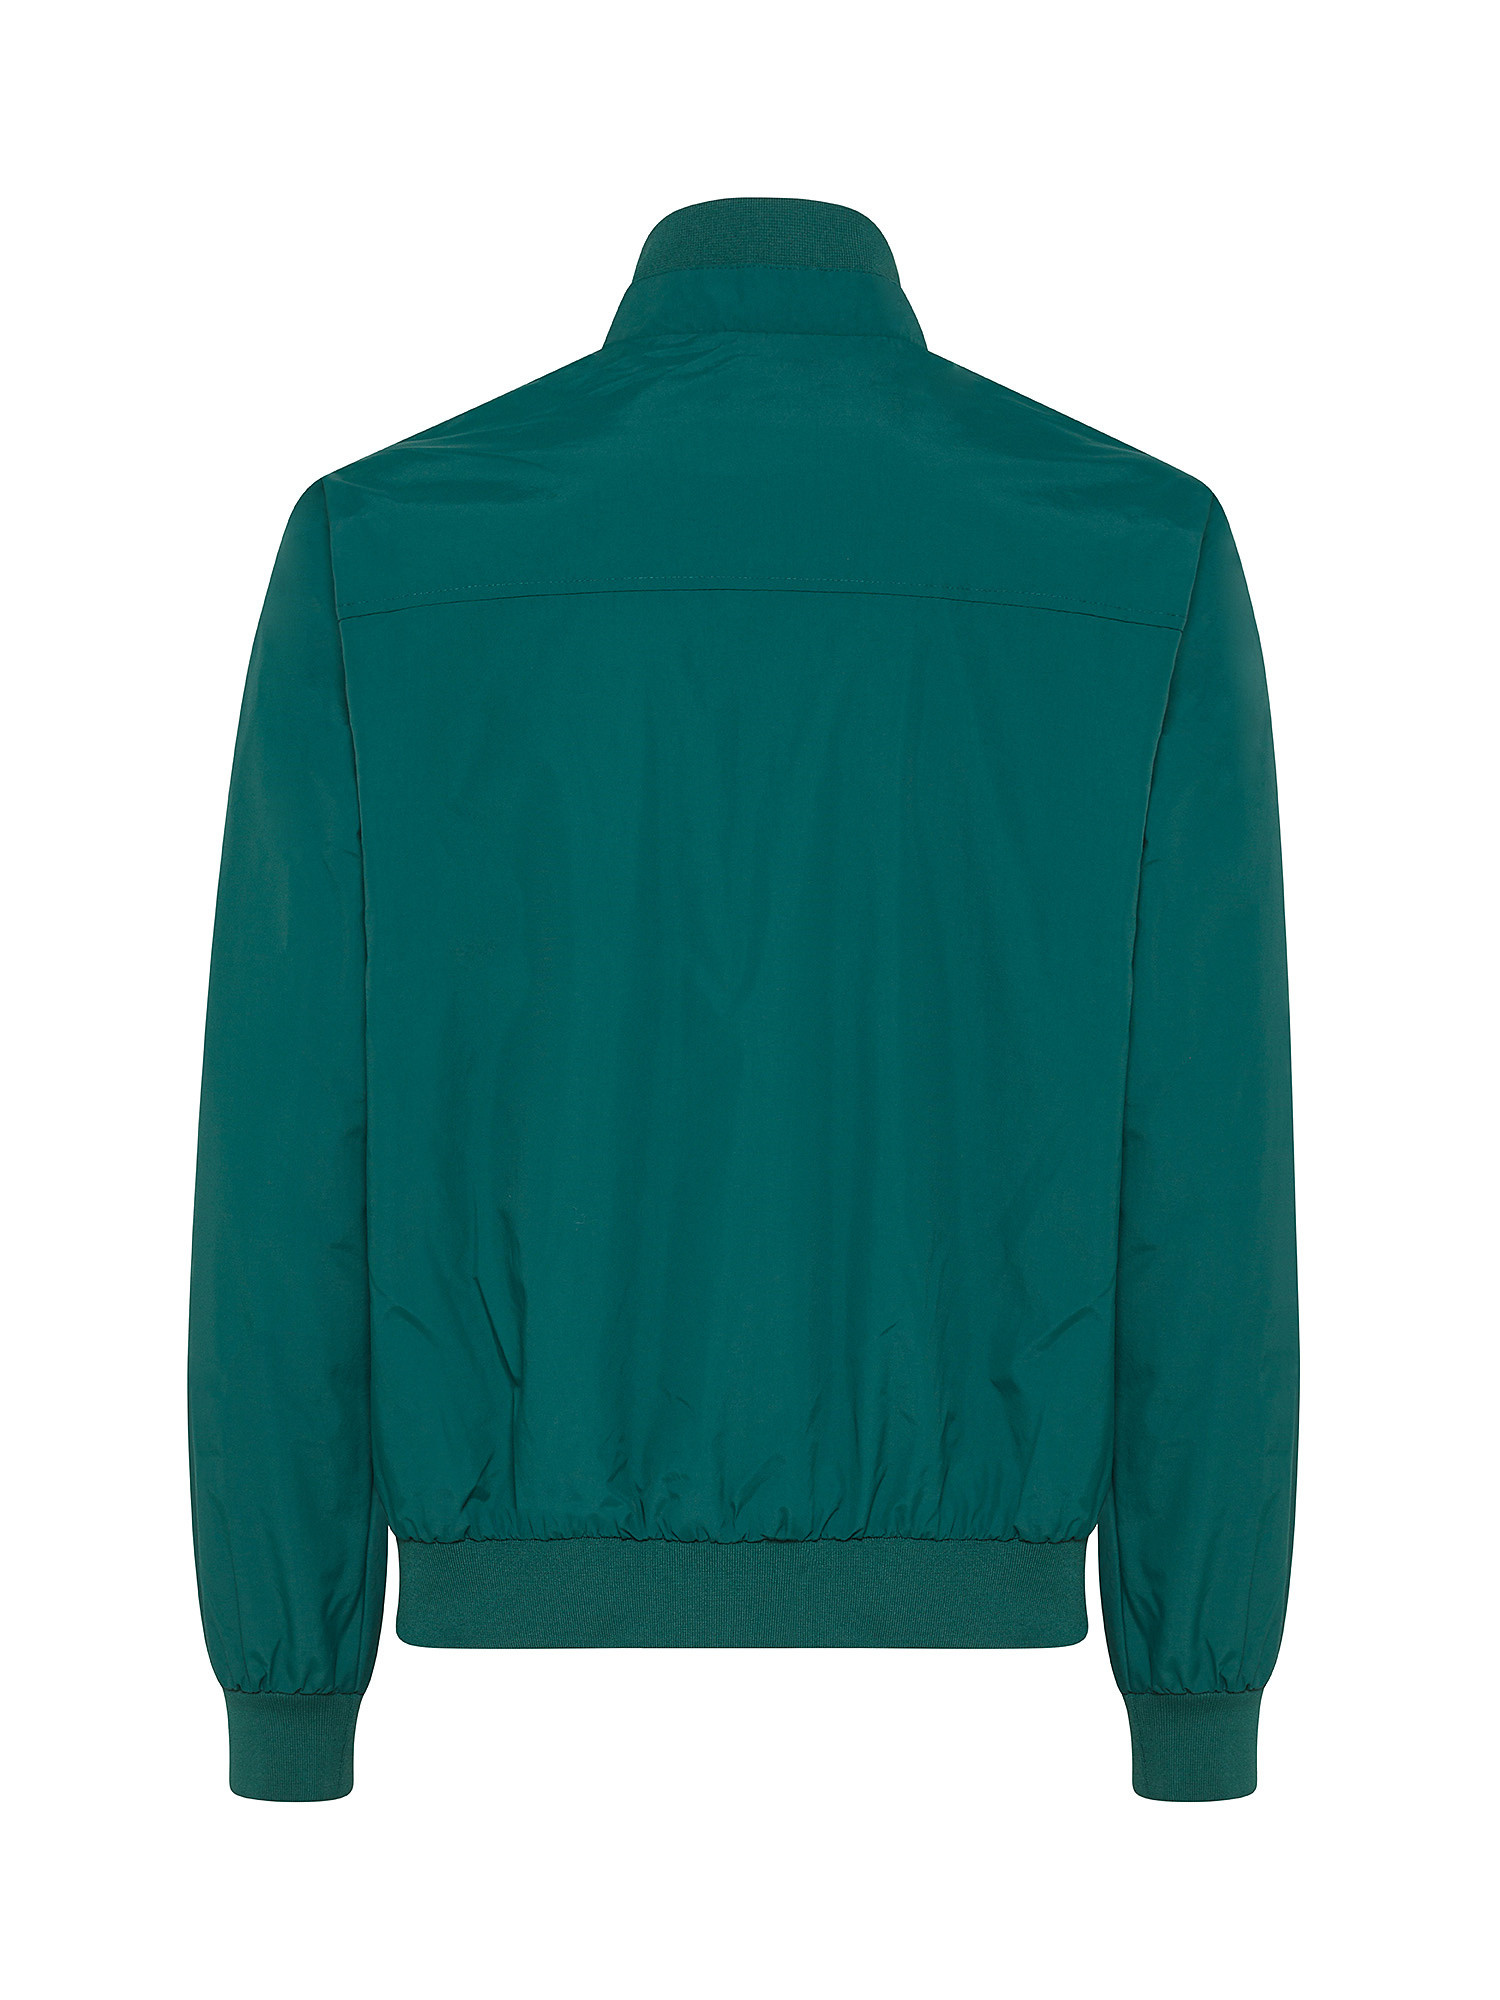 JCT - Giacca full zip, Verde, large image number 1